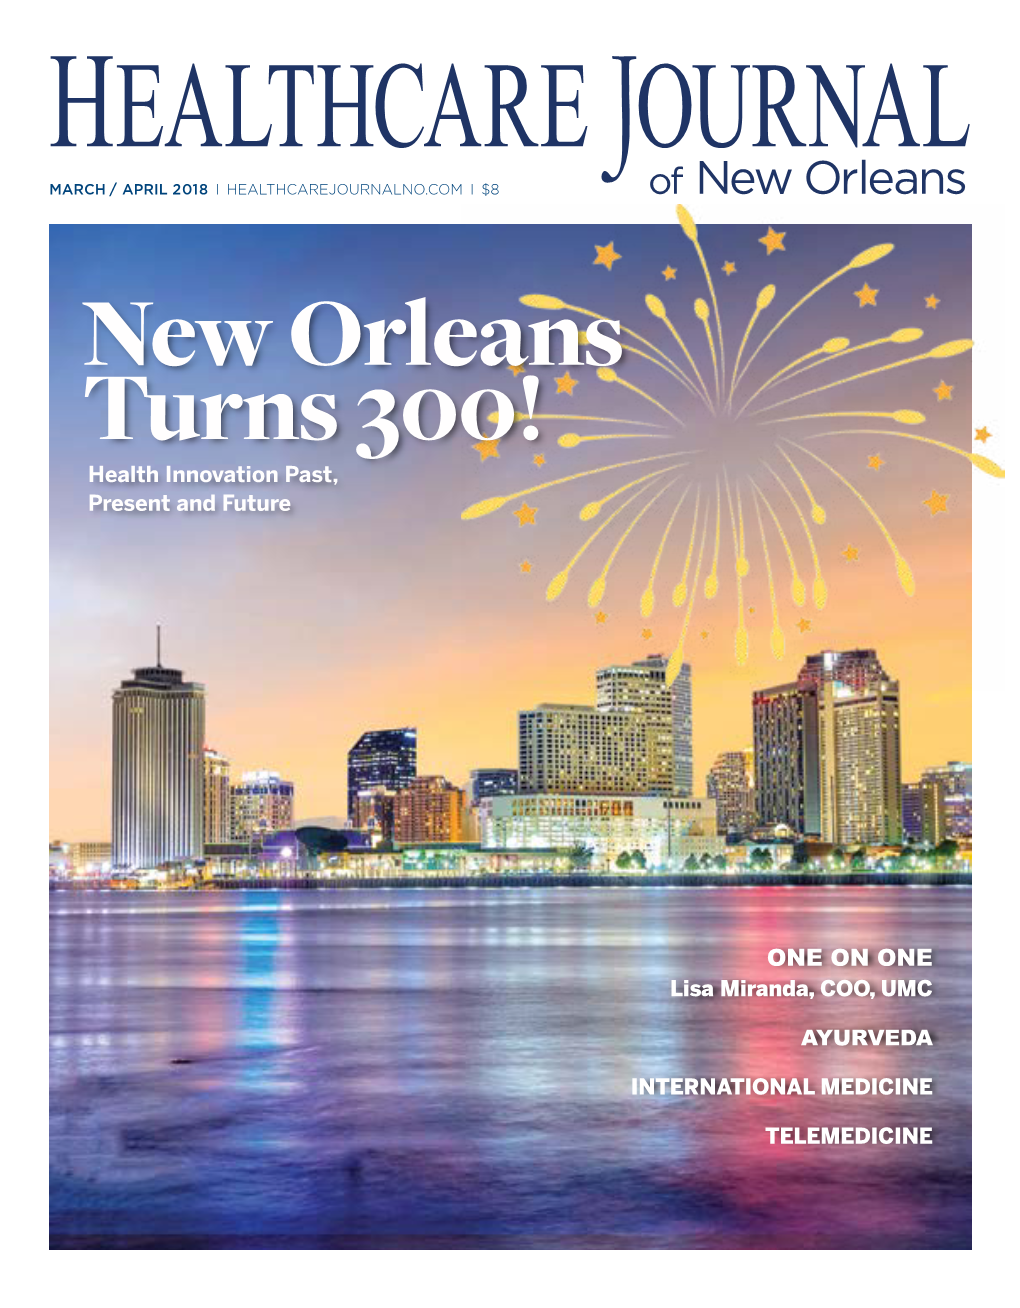 New Orleans Turns 300! Health Innovation Past, Present and Future